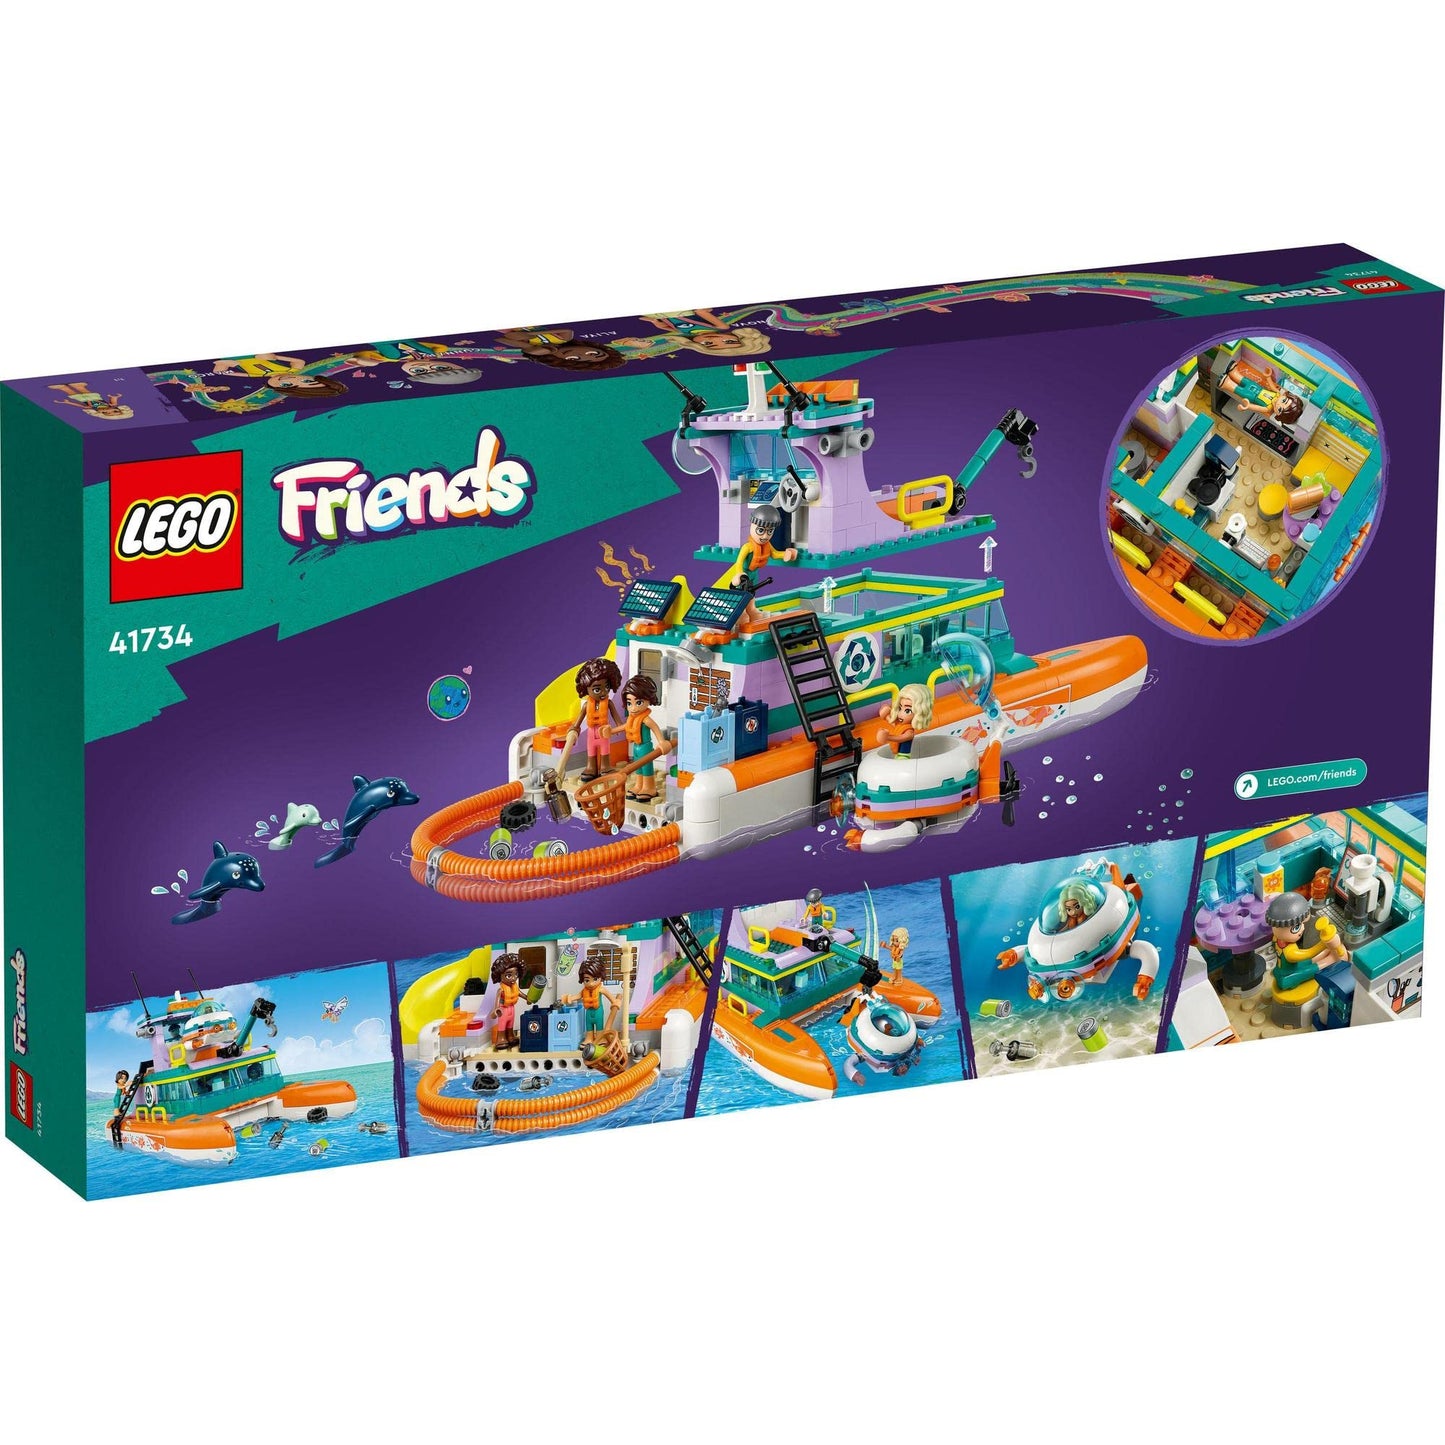 LEGO® Friends Sea Rescue Boat 41734 Building Toy Set for Kids Ages 7+ Who Love Creative Play and Sea Life Stories